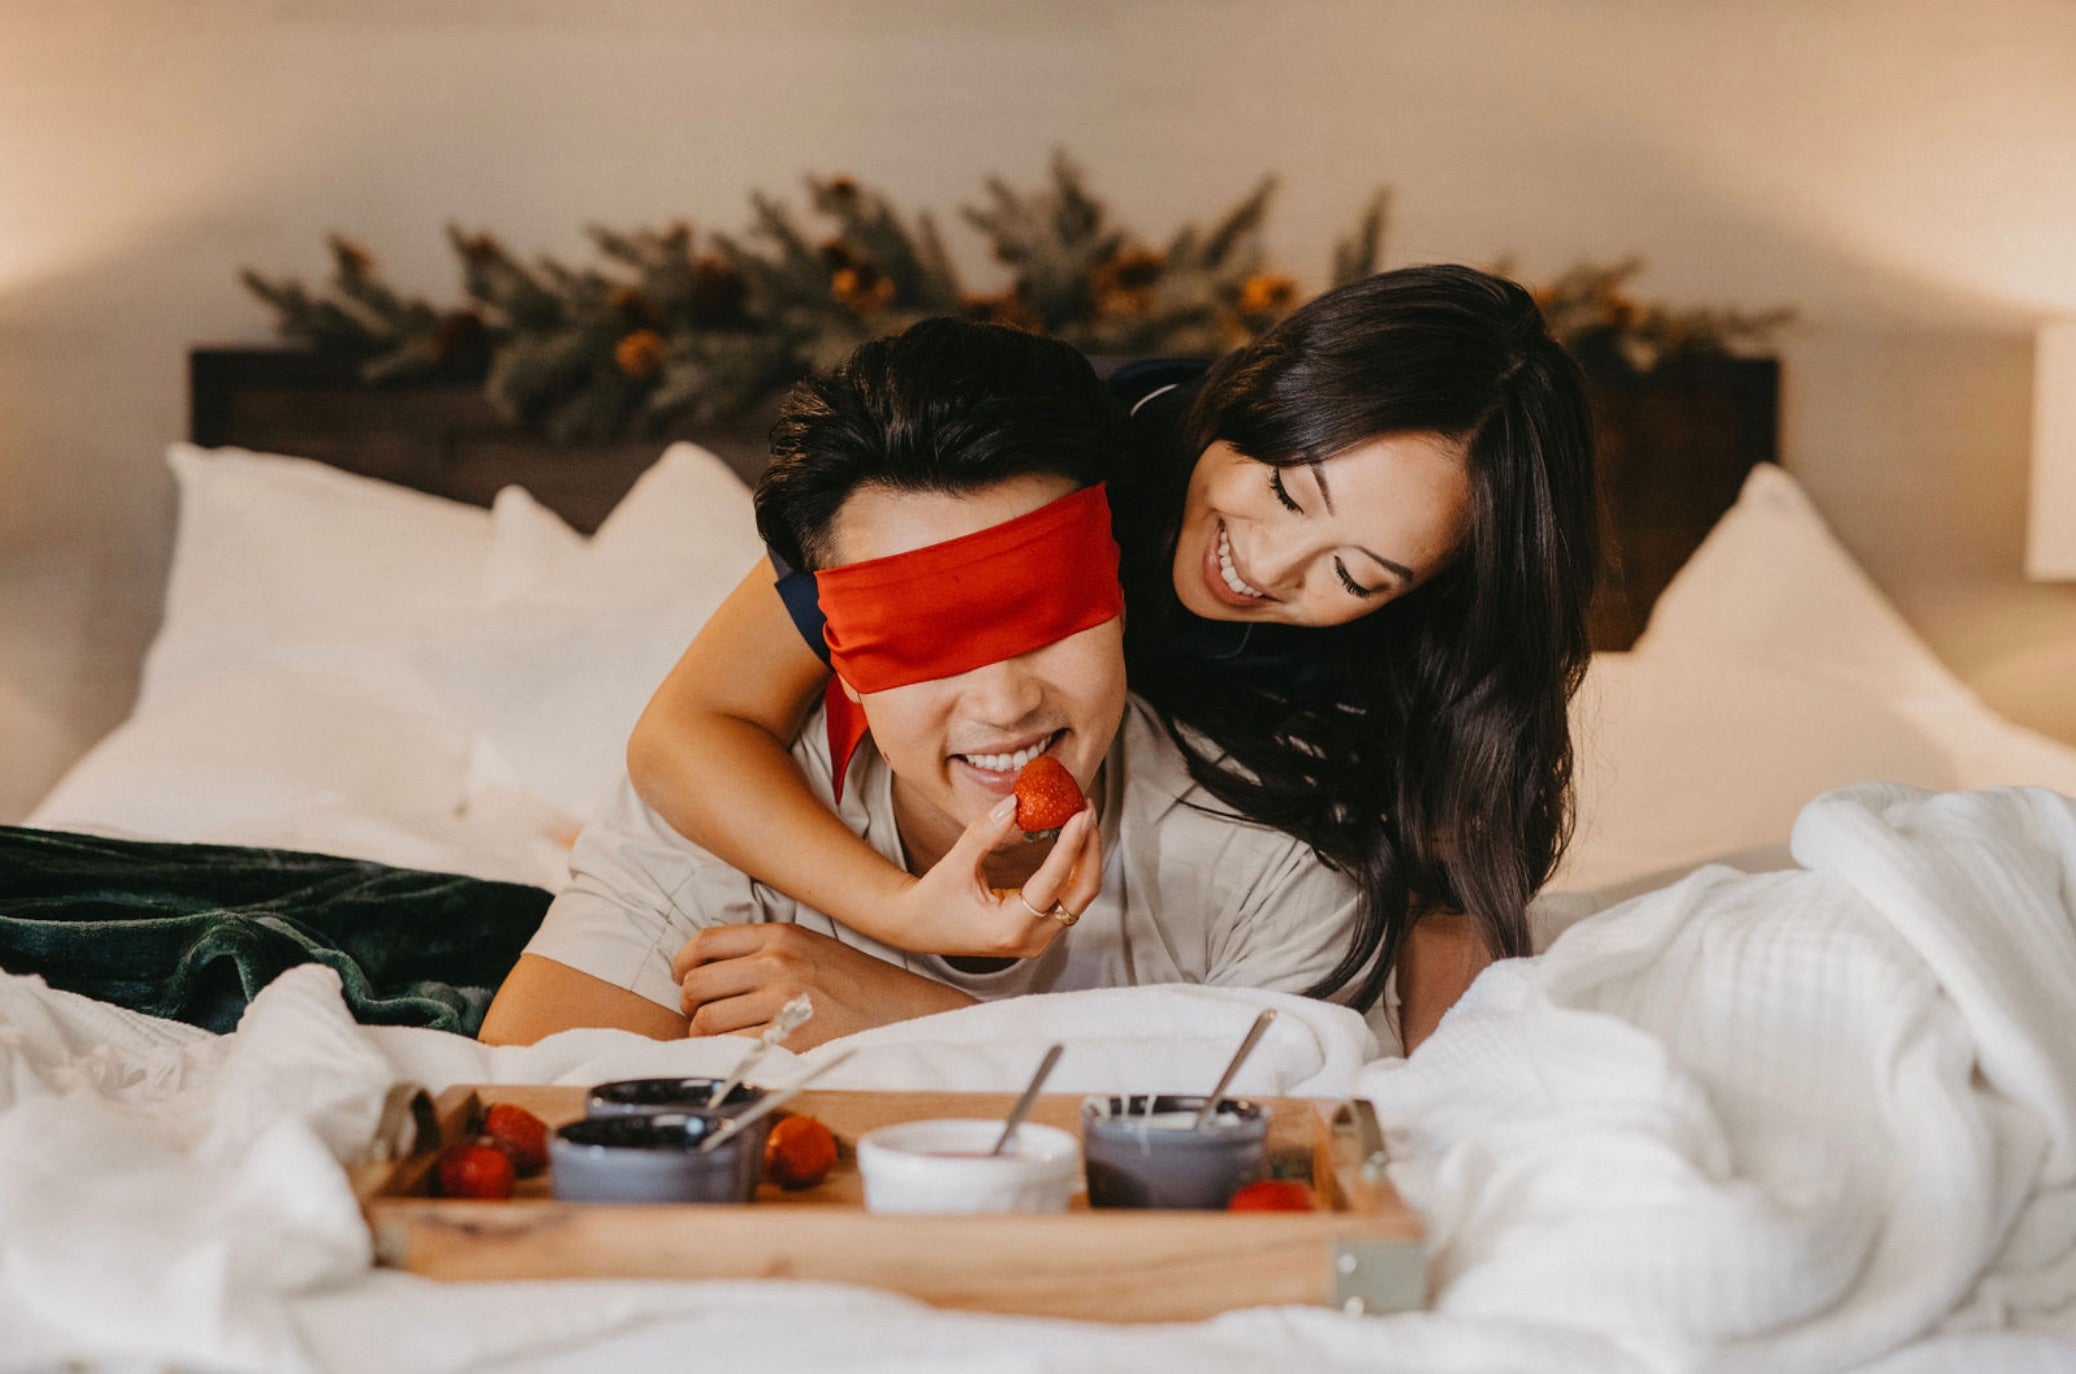 Wife feeds husband strawberries as he is blindfolded in bed